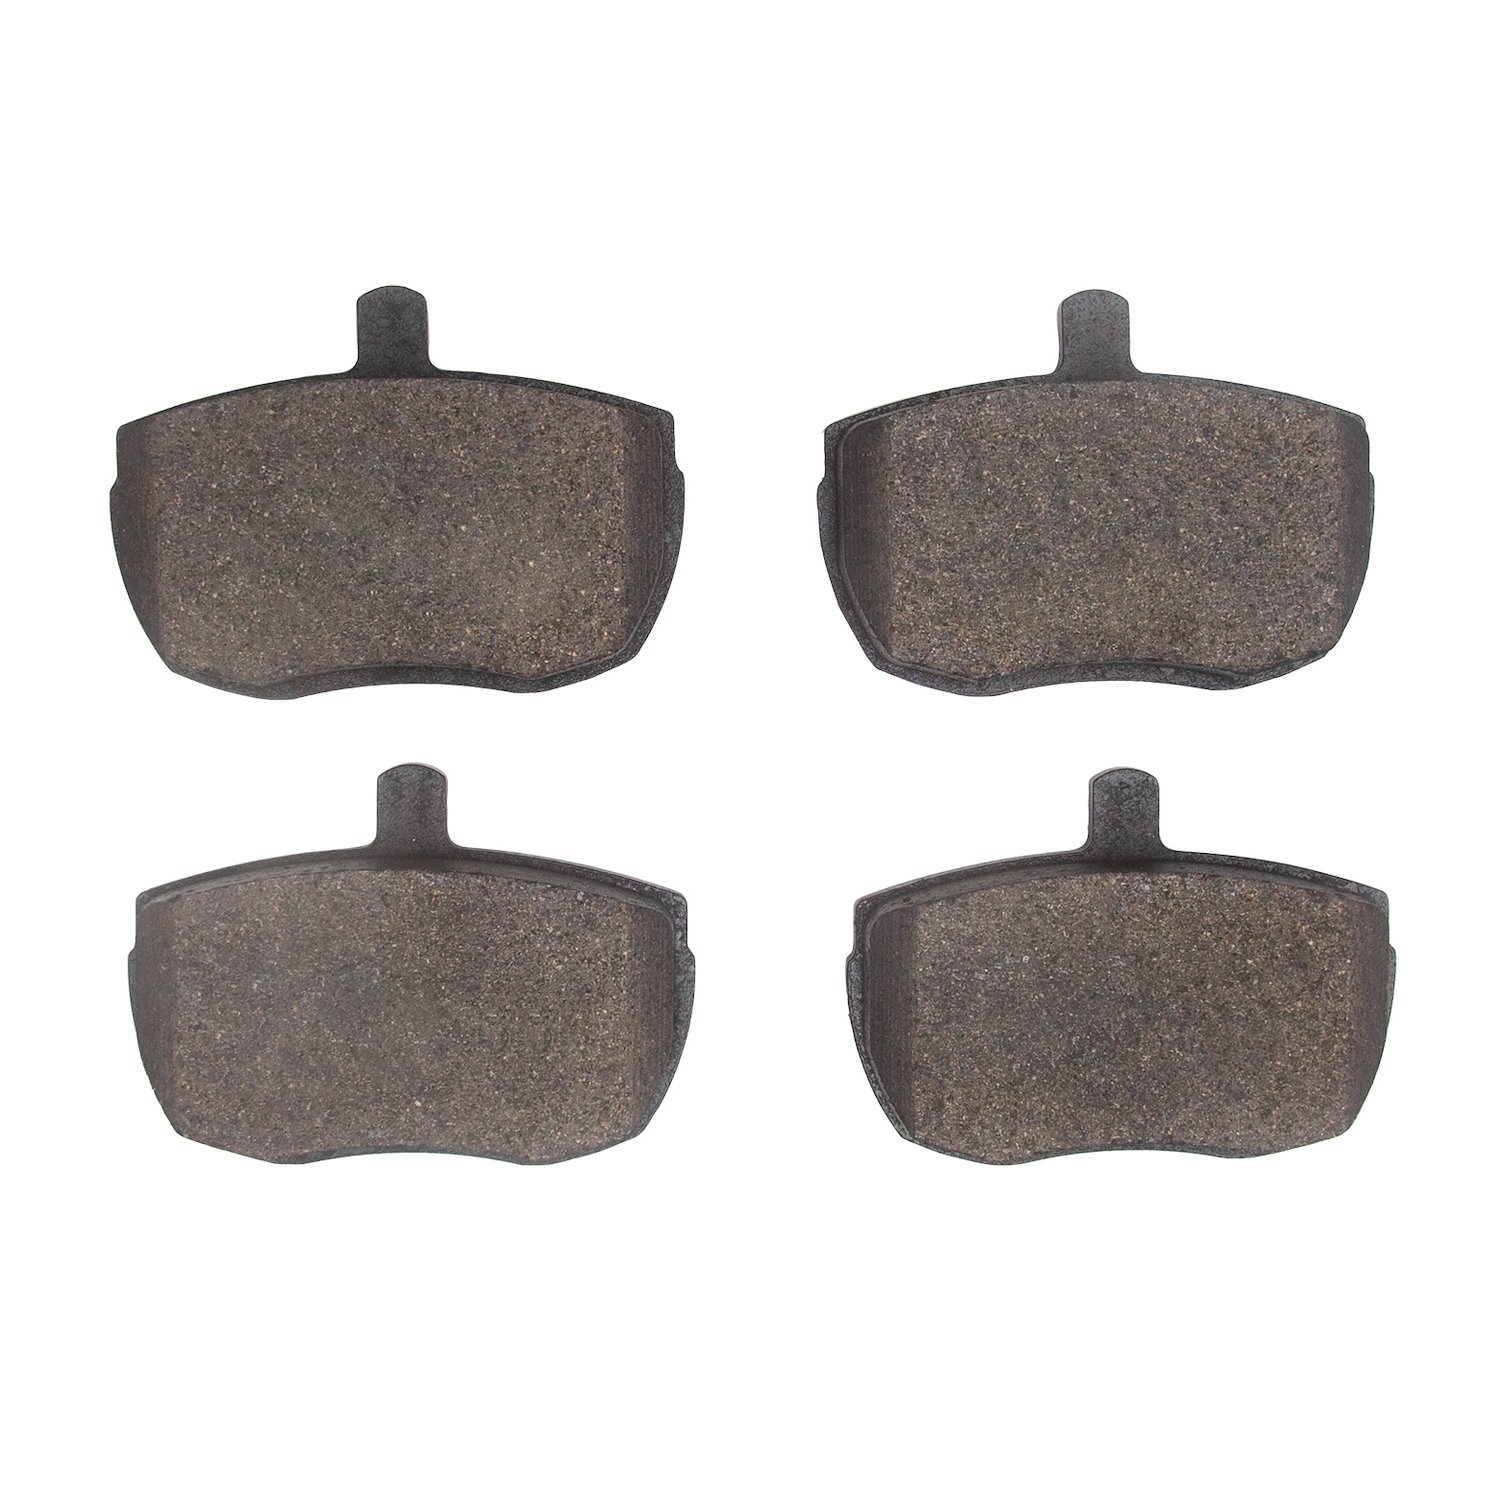 1551-0519-10 5000 Advanced Low-Metallic Brake Pads, 1974-1974 Land Rover, Position: Front